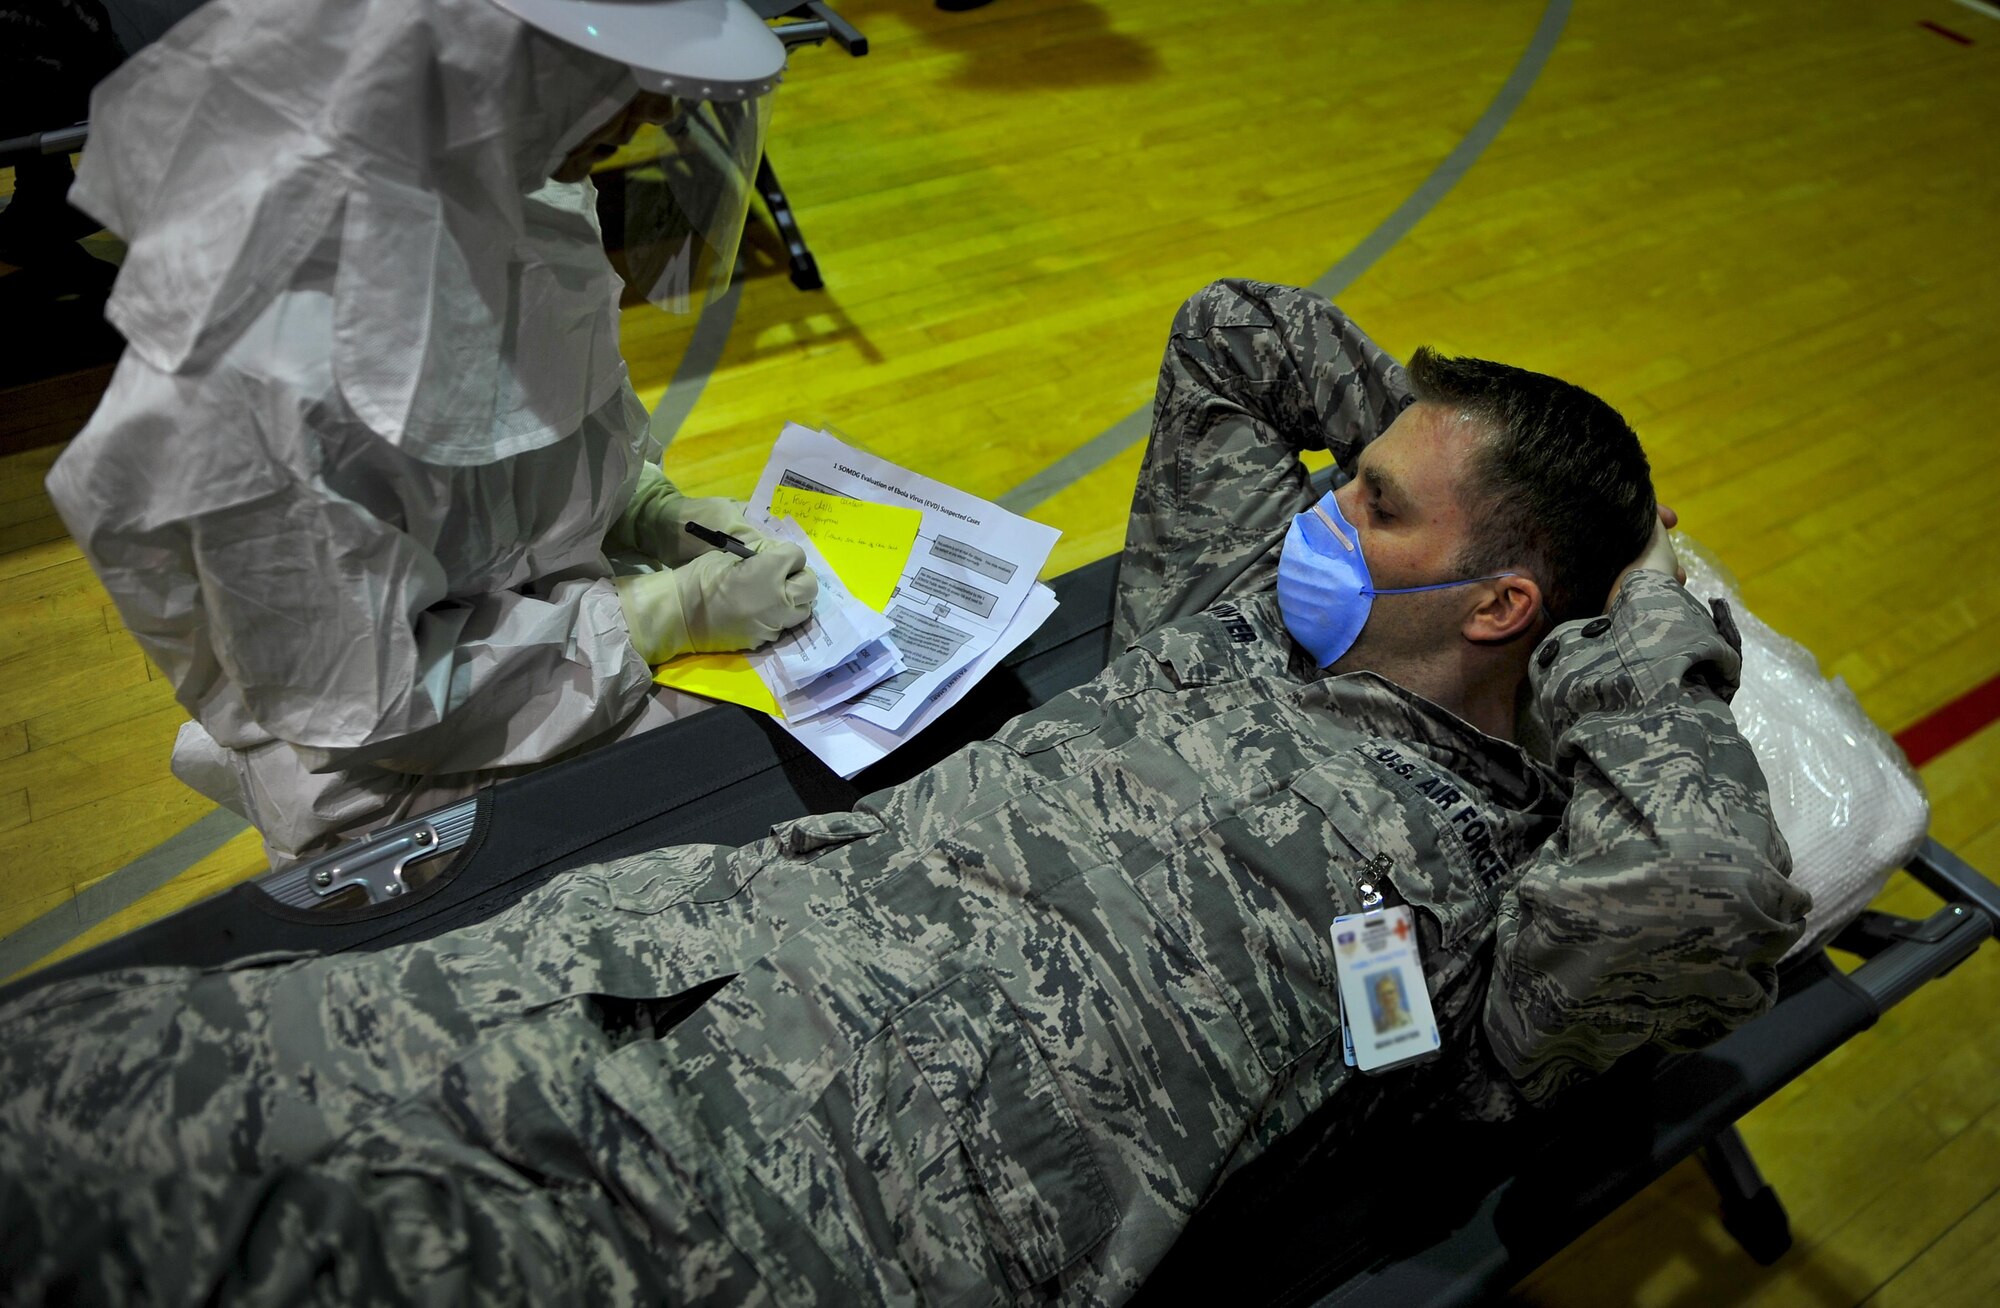 Staff Sgt. Sean Winter, 1st Special Operations Medical Group, simulates symptoms during a disease containment exercise at Hurlburt Field, Fla., Feb. 4, 2015. The medical staff focused on the interaction and coordination between multiple units that would be involved in responding to a disease outbreak. (U.S. Air Force photo/Senior Airman Christopher Callaway)